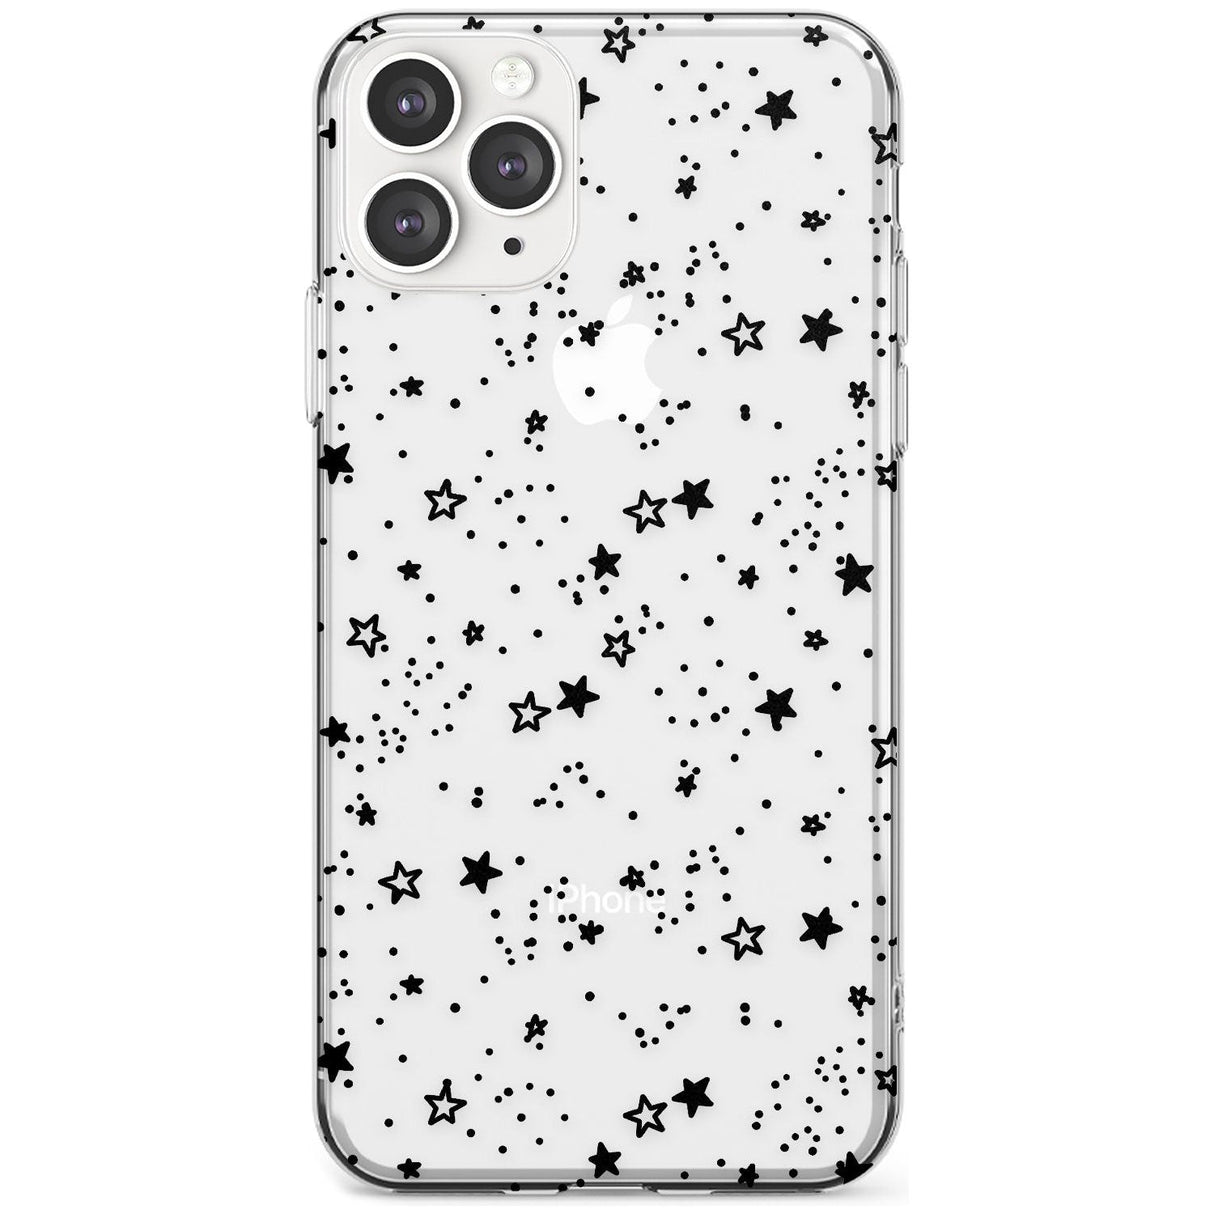 Solid Stars Slim TPU Phone Case for iPhone 11 Pro Max